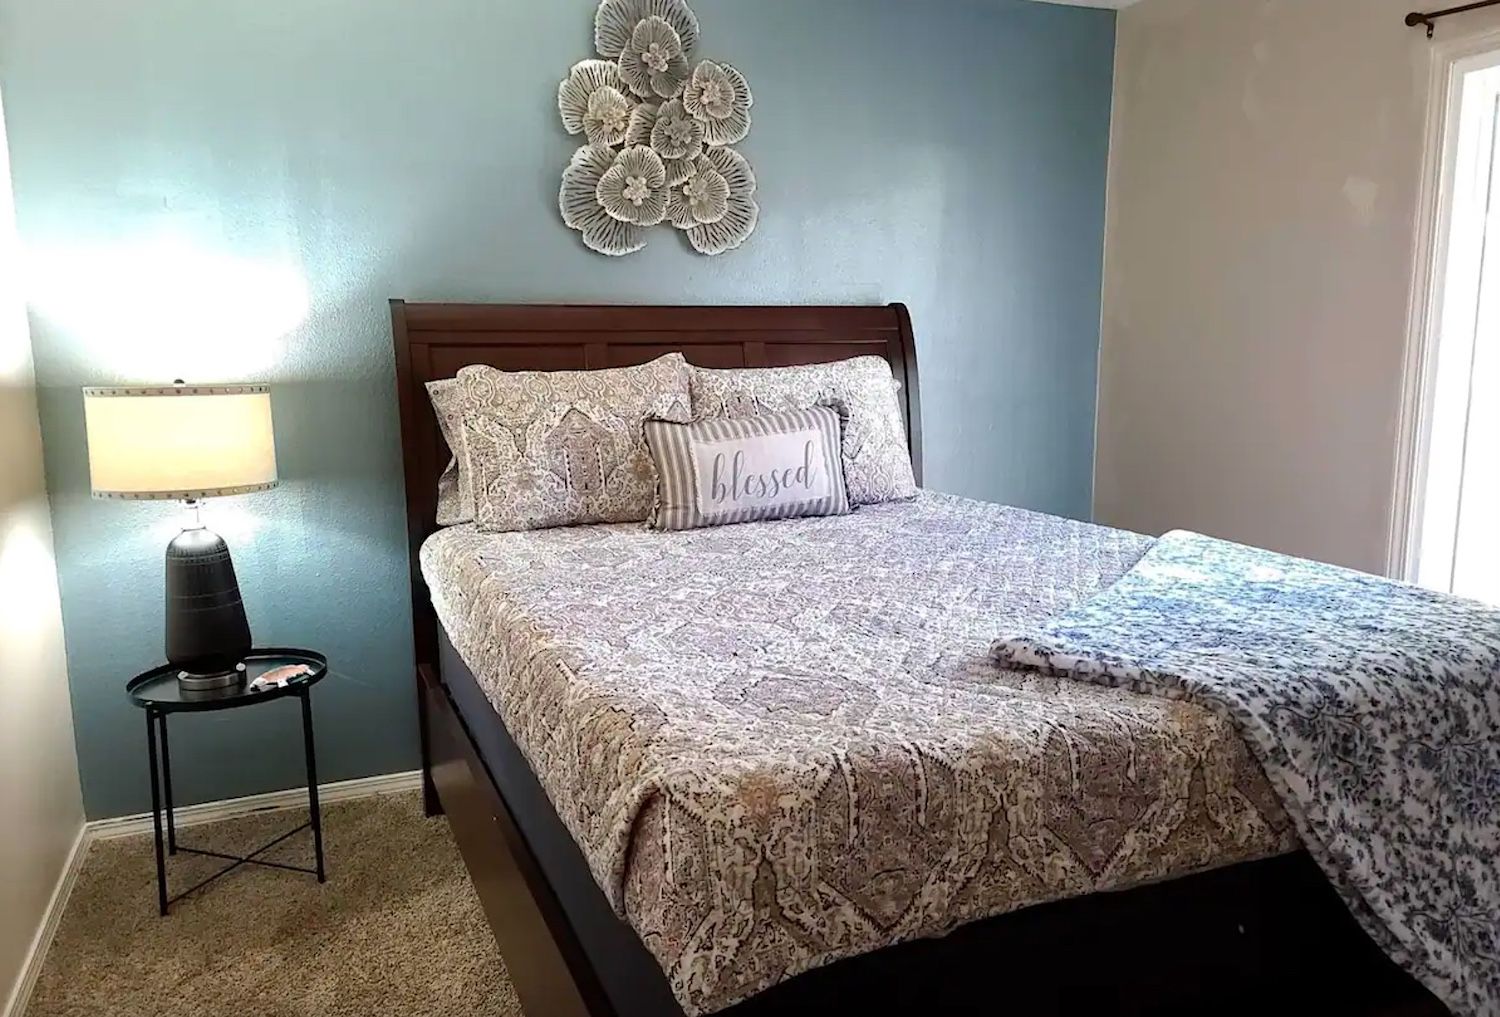 Bedroom in Airbnb available near the Albuquerque International Balloon Festival